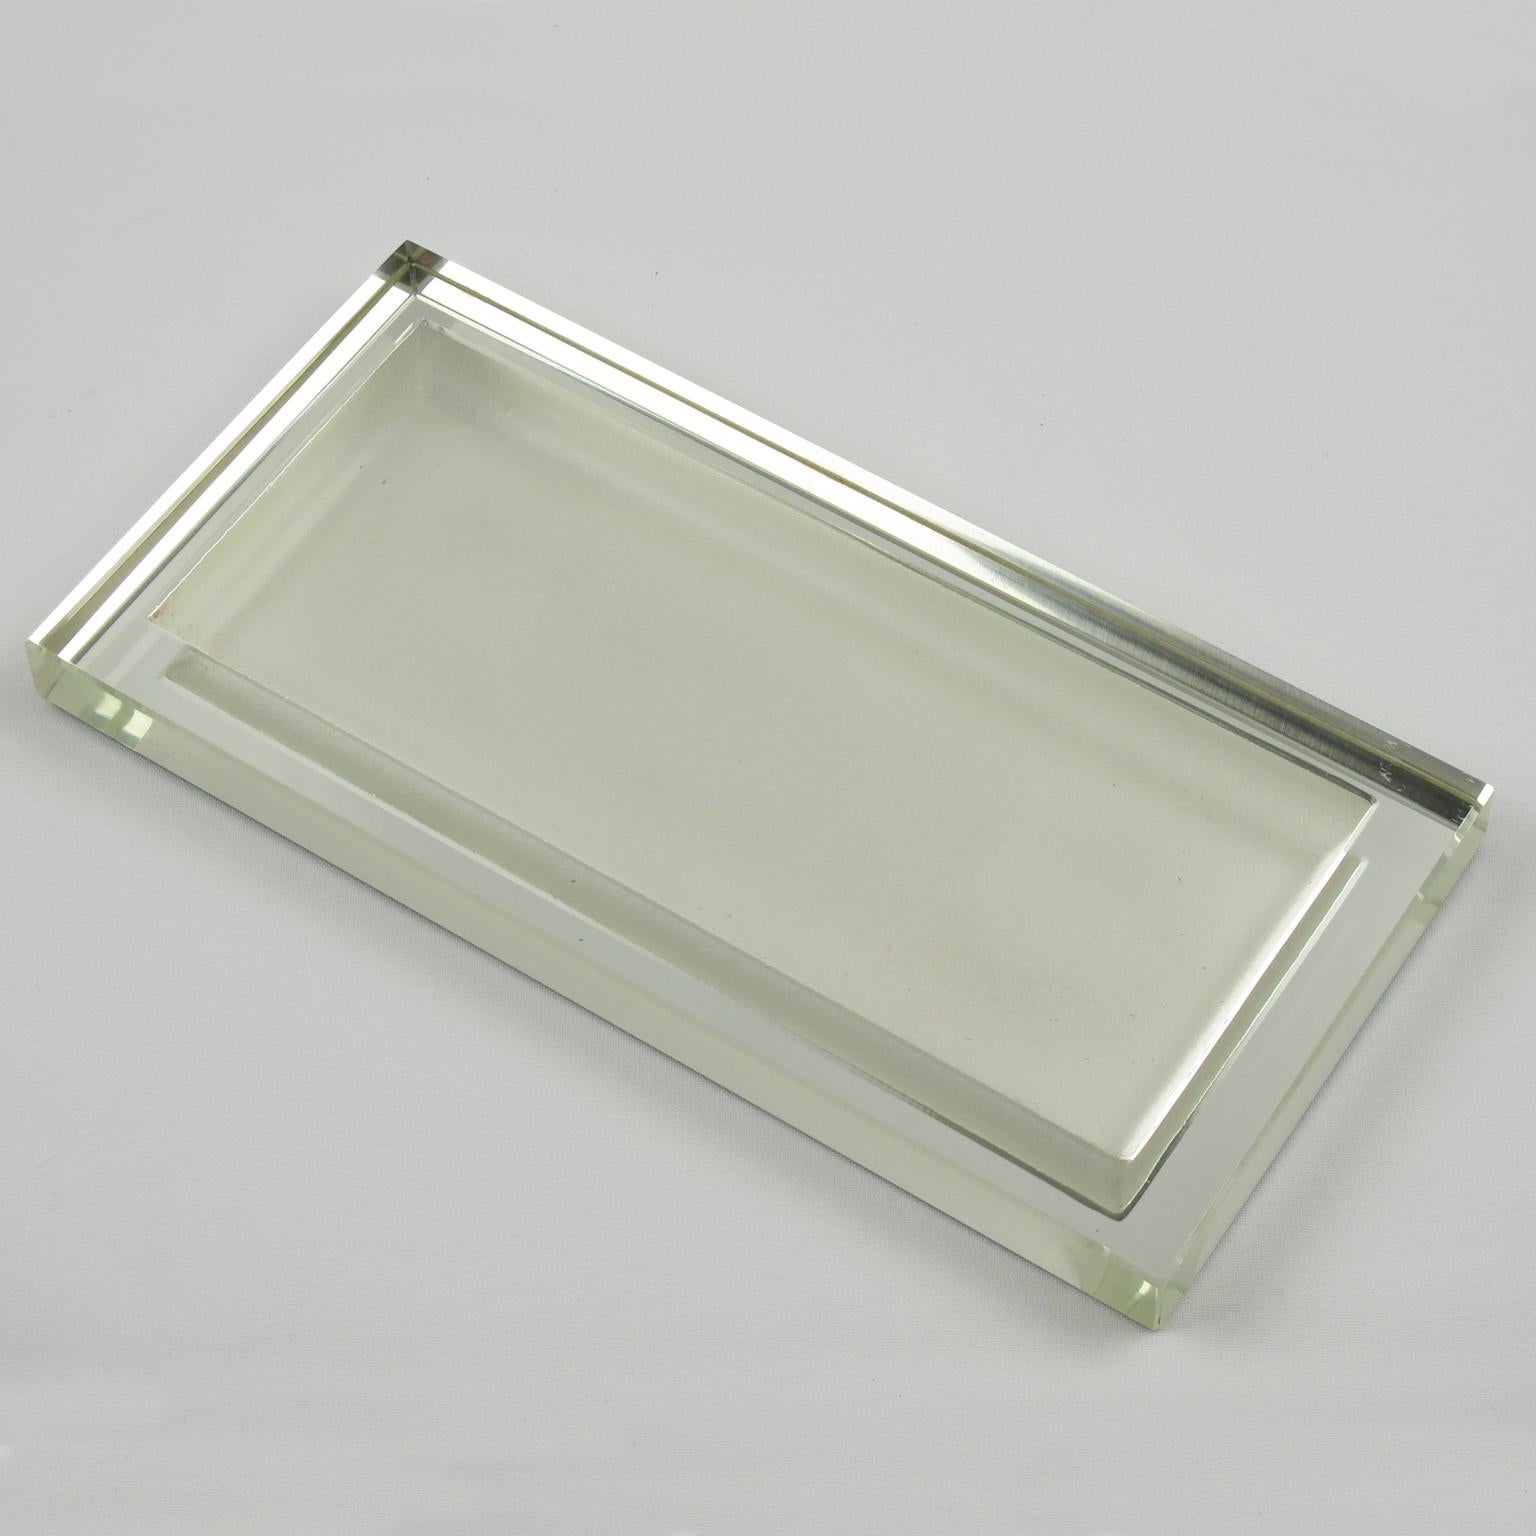 French Jean Luce Art Deco Mirrored Glass Tray Platter Catchall